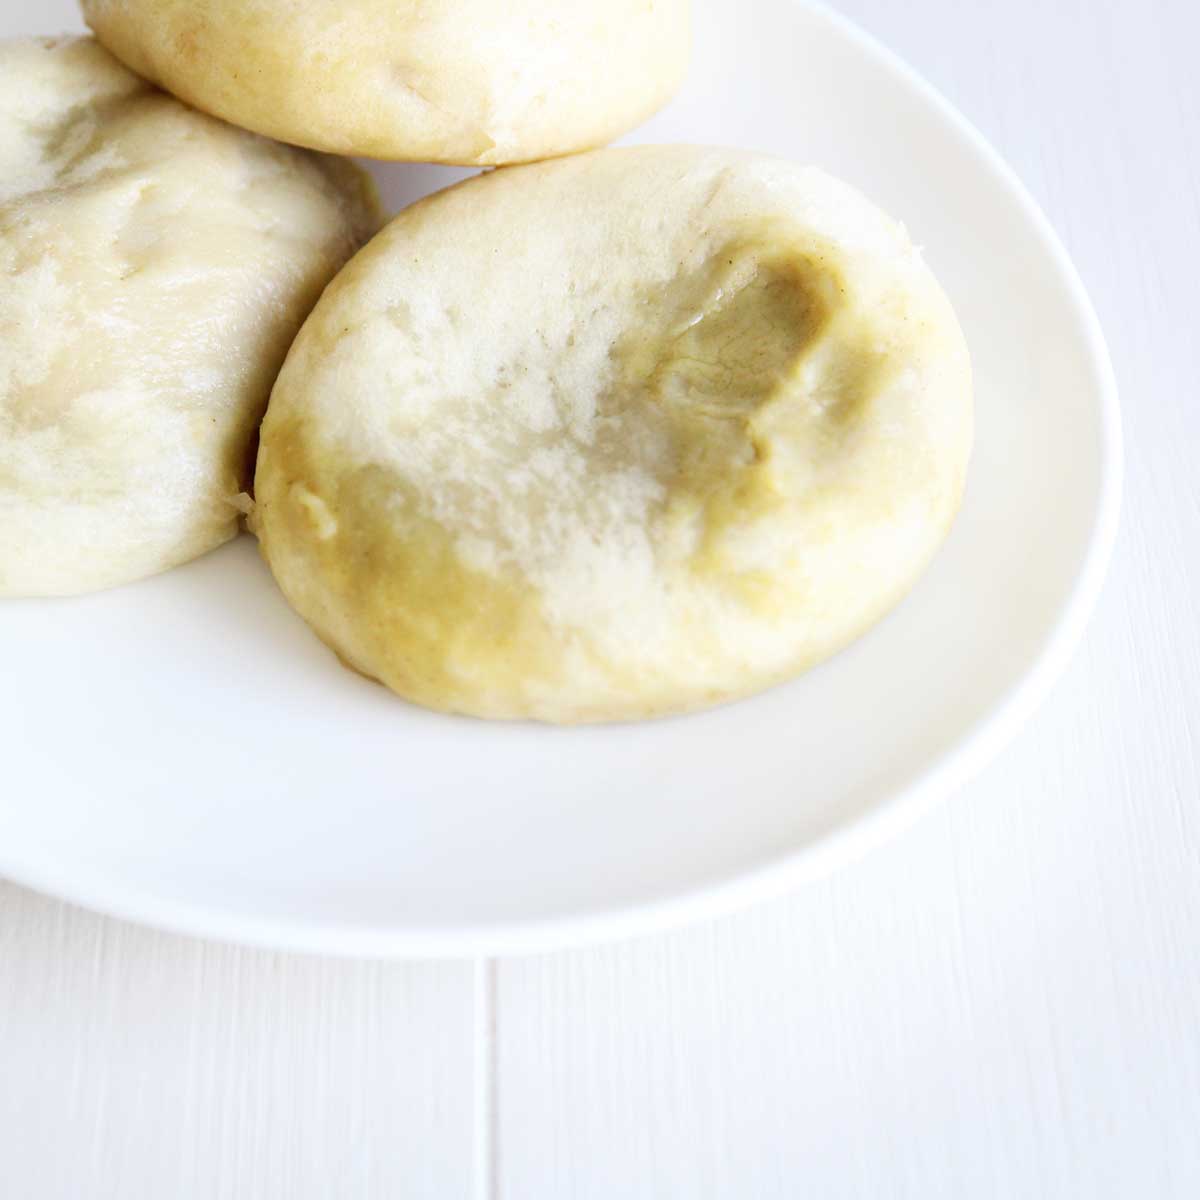 No Knead, No Yeast Japanese Tofu Steamed Buns Recipe with Red Bean Paste Filling - steamed buns